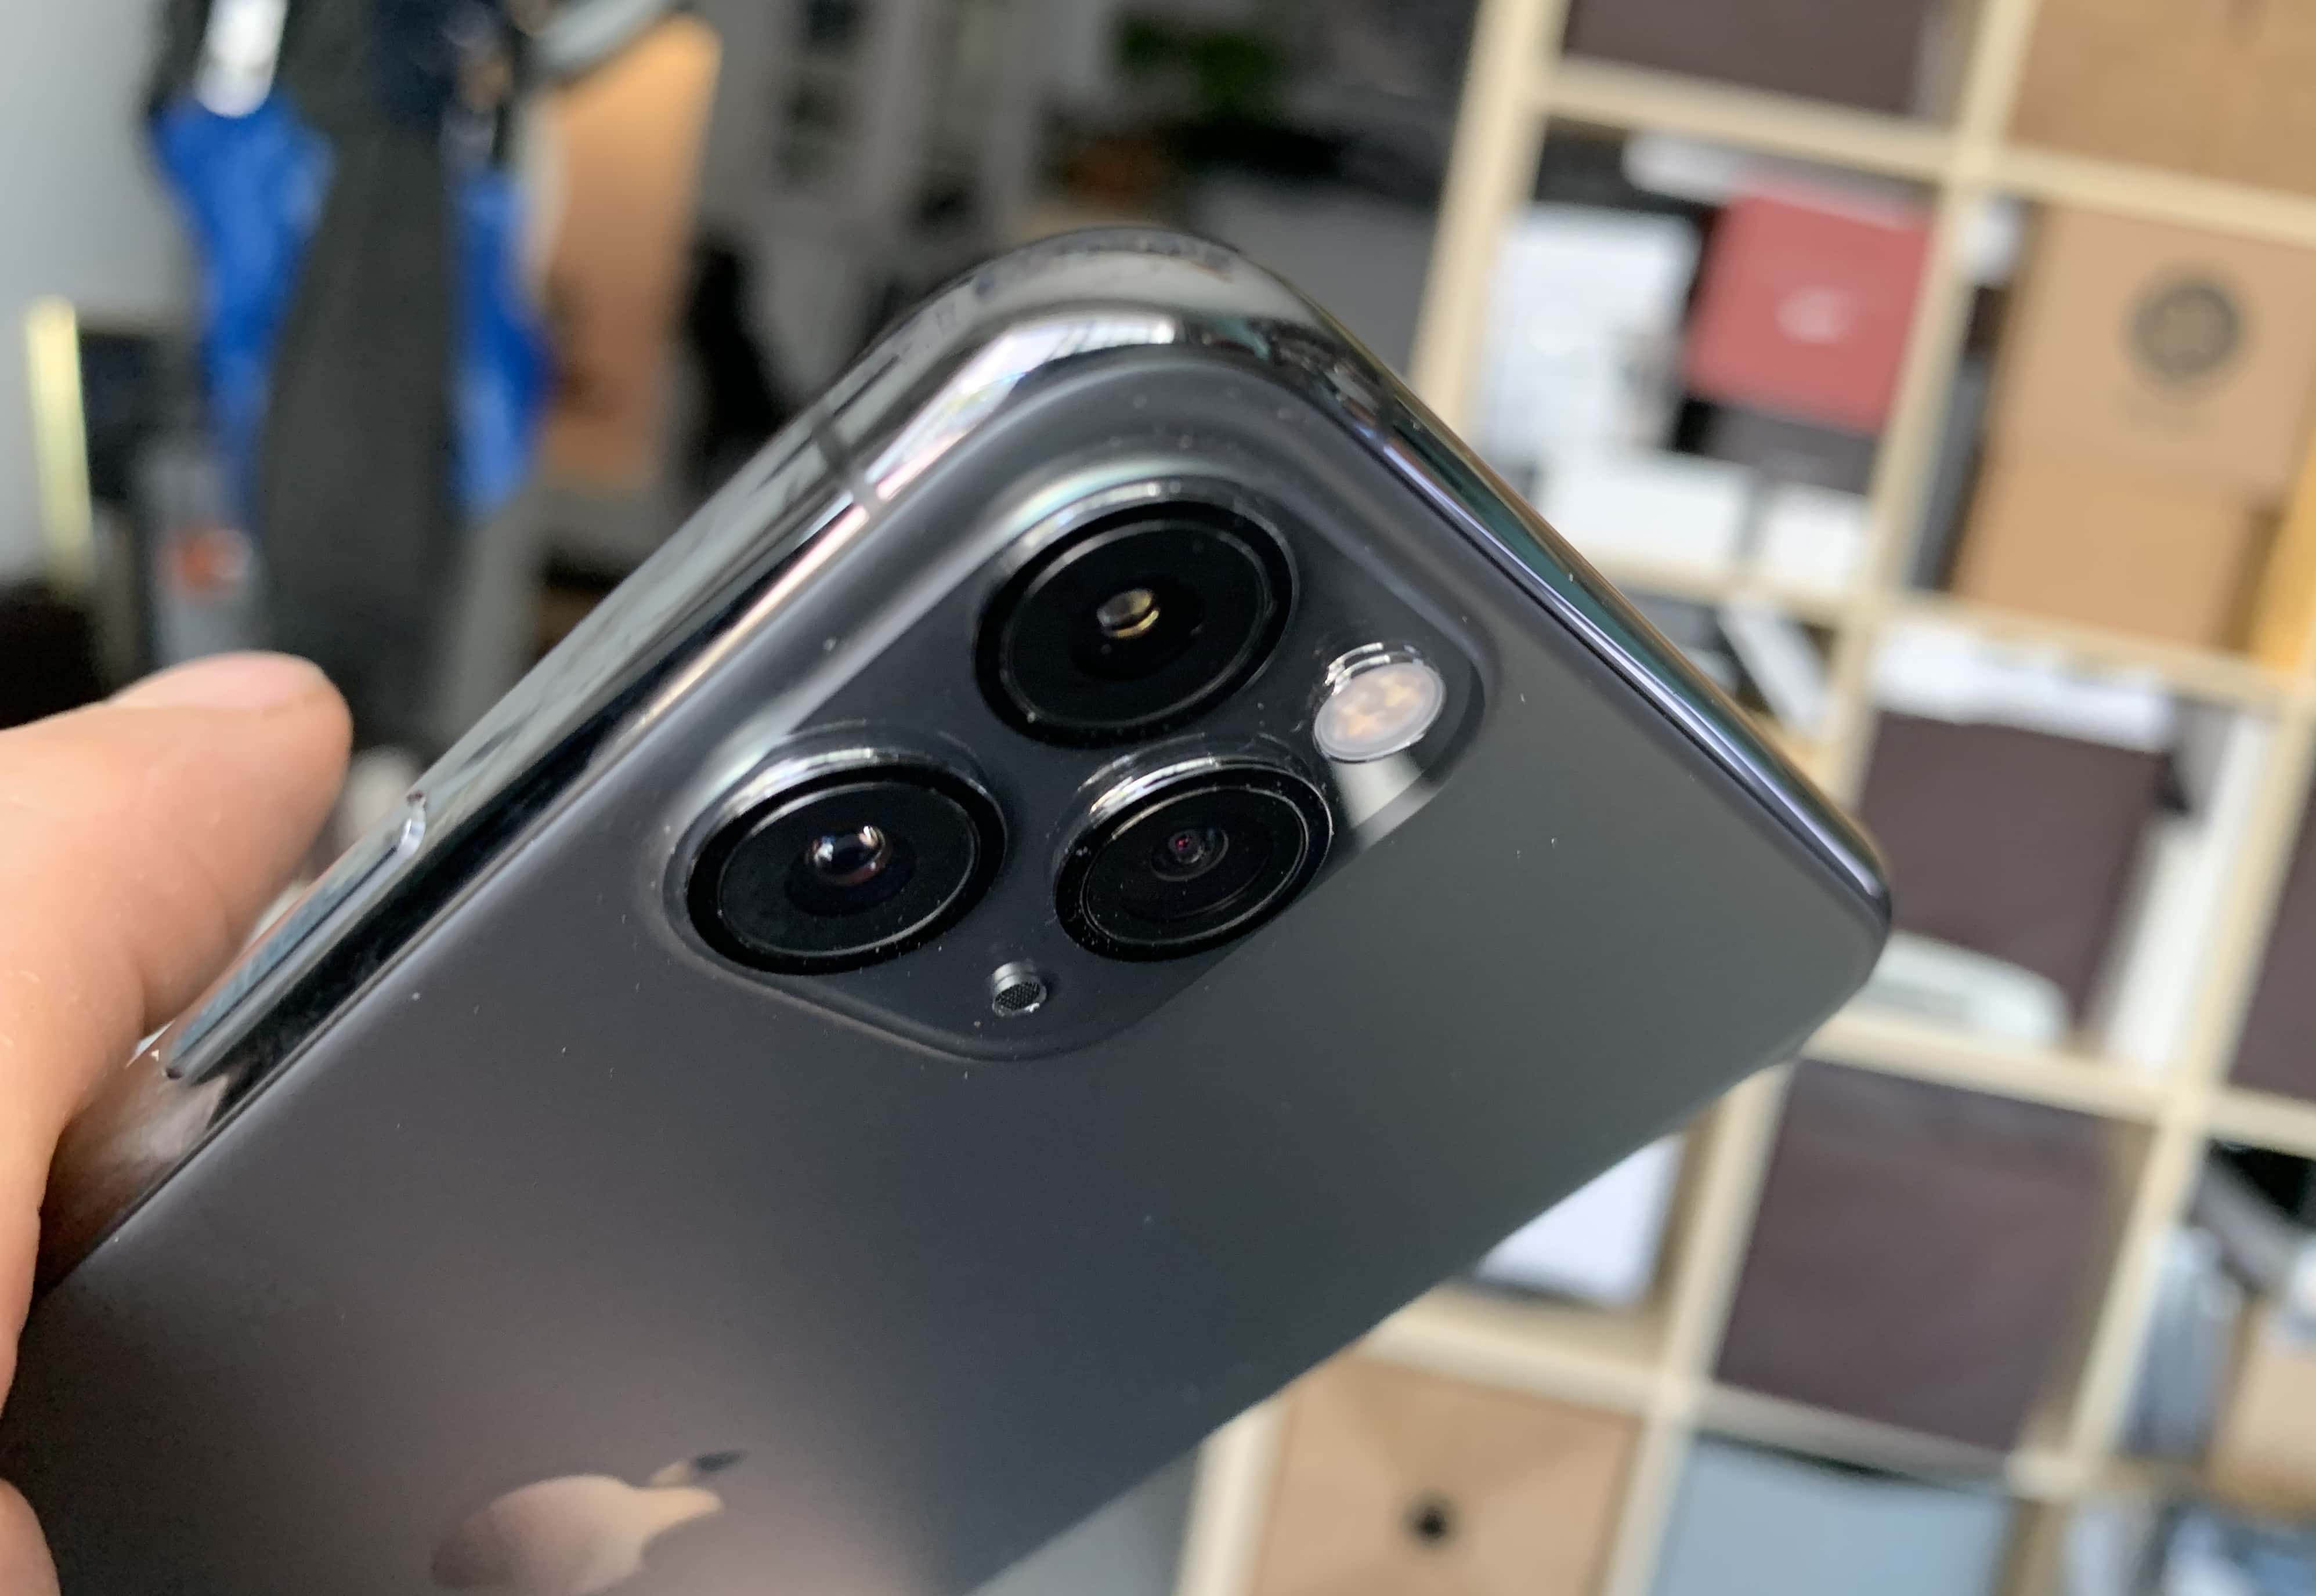 The three cameras on the iPhone 11 Pro Max